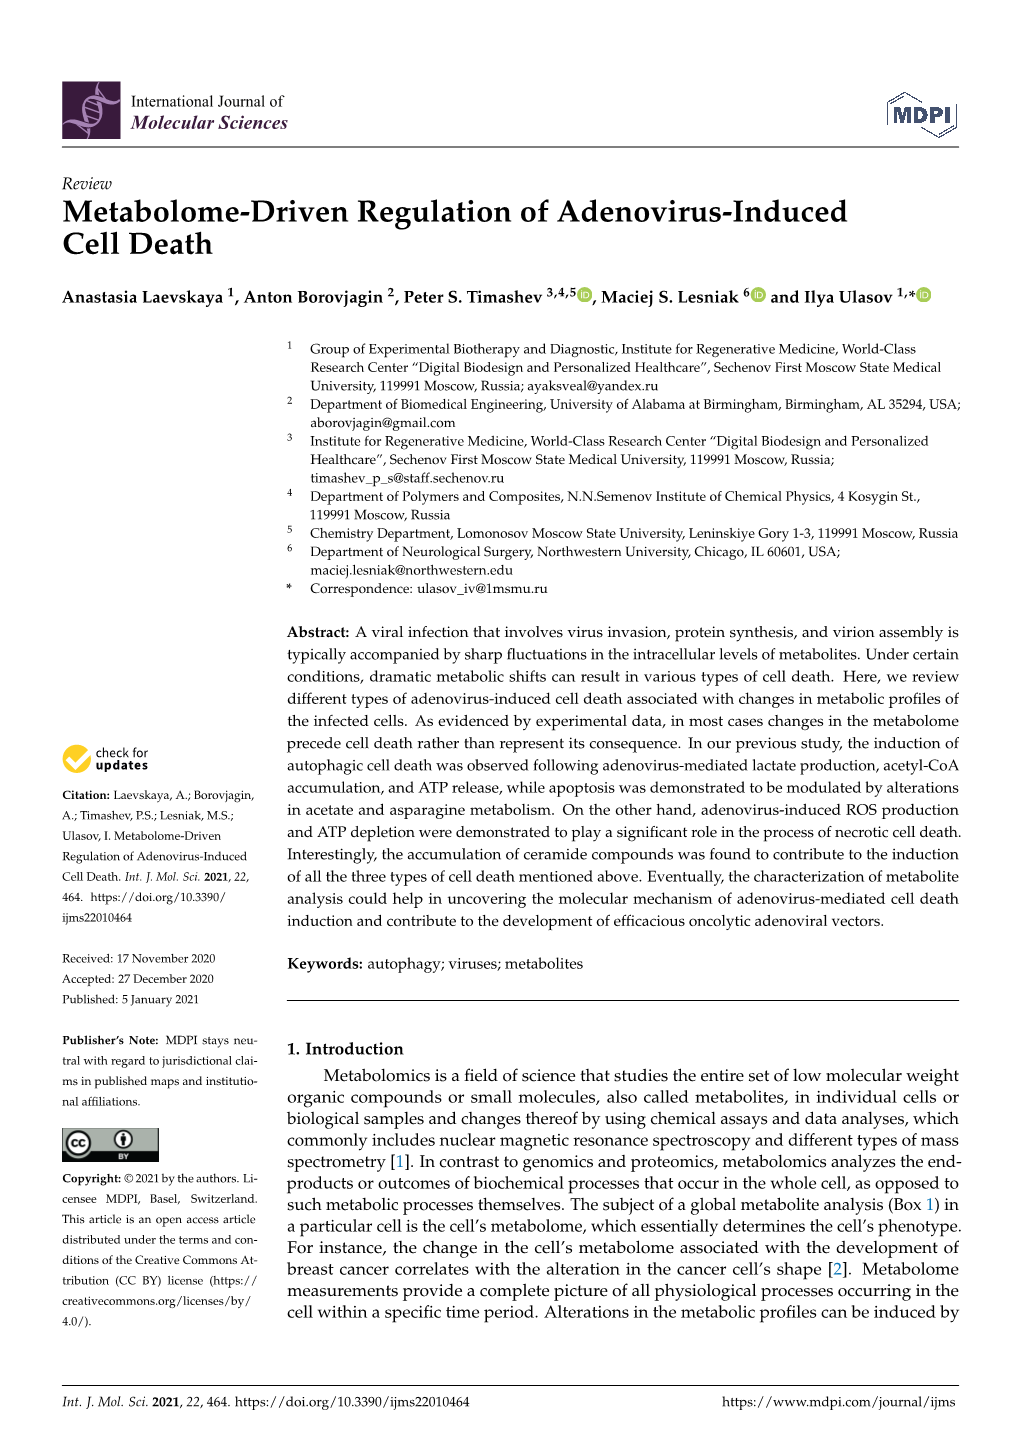 Metabolome-Driven Regulation of Adenovirus-Induced Cell Death